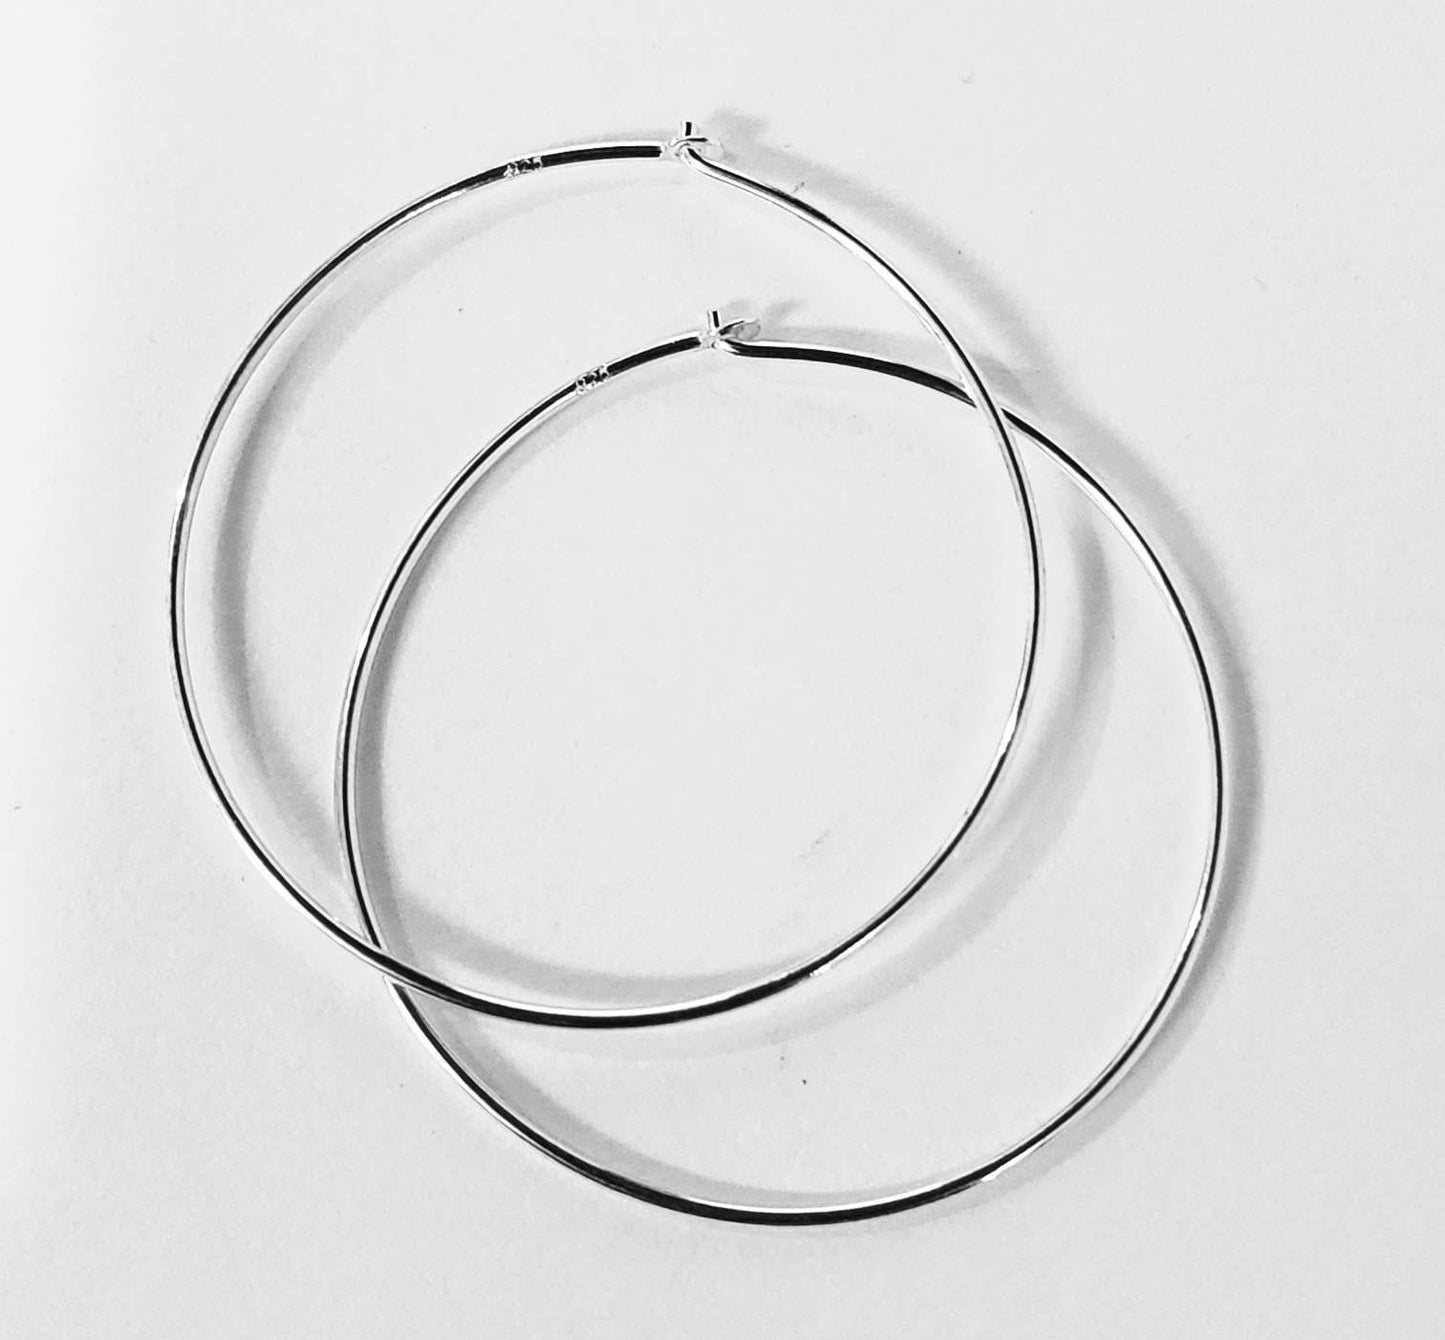 925 sterling silver beading hoop 25mm, 30mm & 35mm earring , jewelry making supplies, high quality, earring making findings 1 pair .